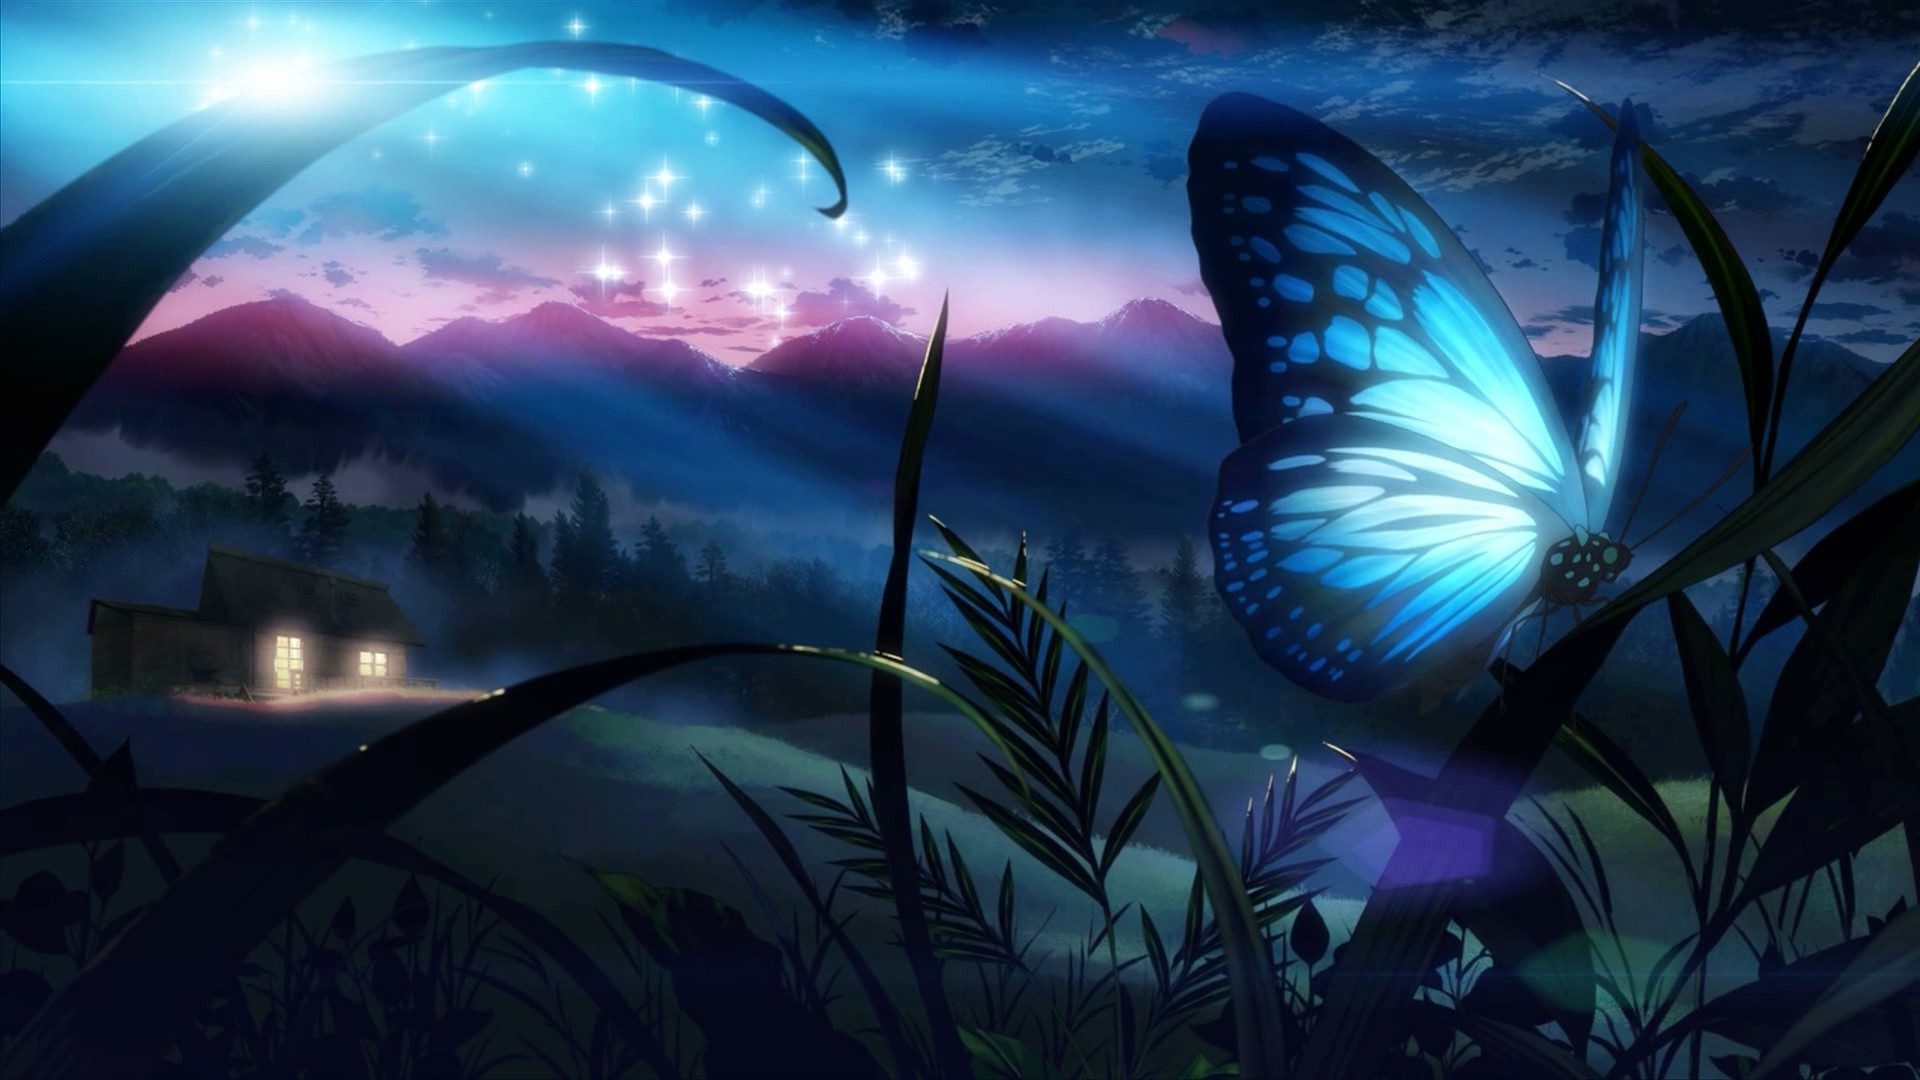 Anime Wallpaper For Pc Free Download Hd : Anime Wallpapers Hd Download ...